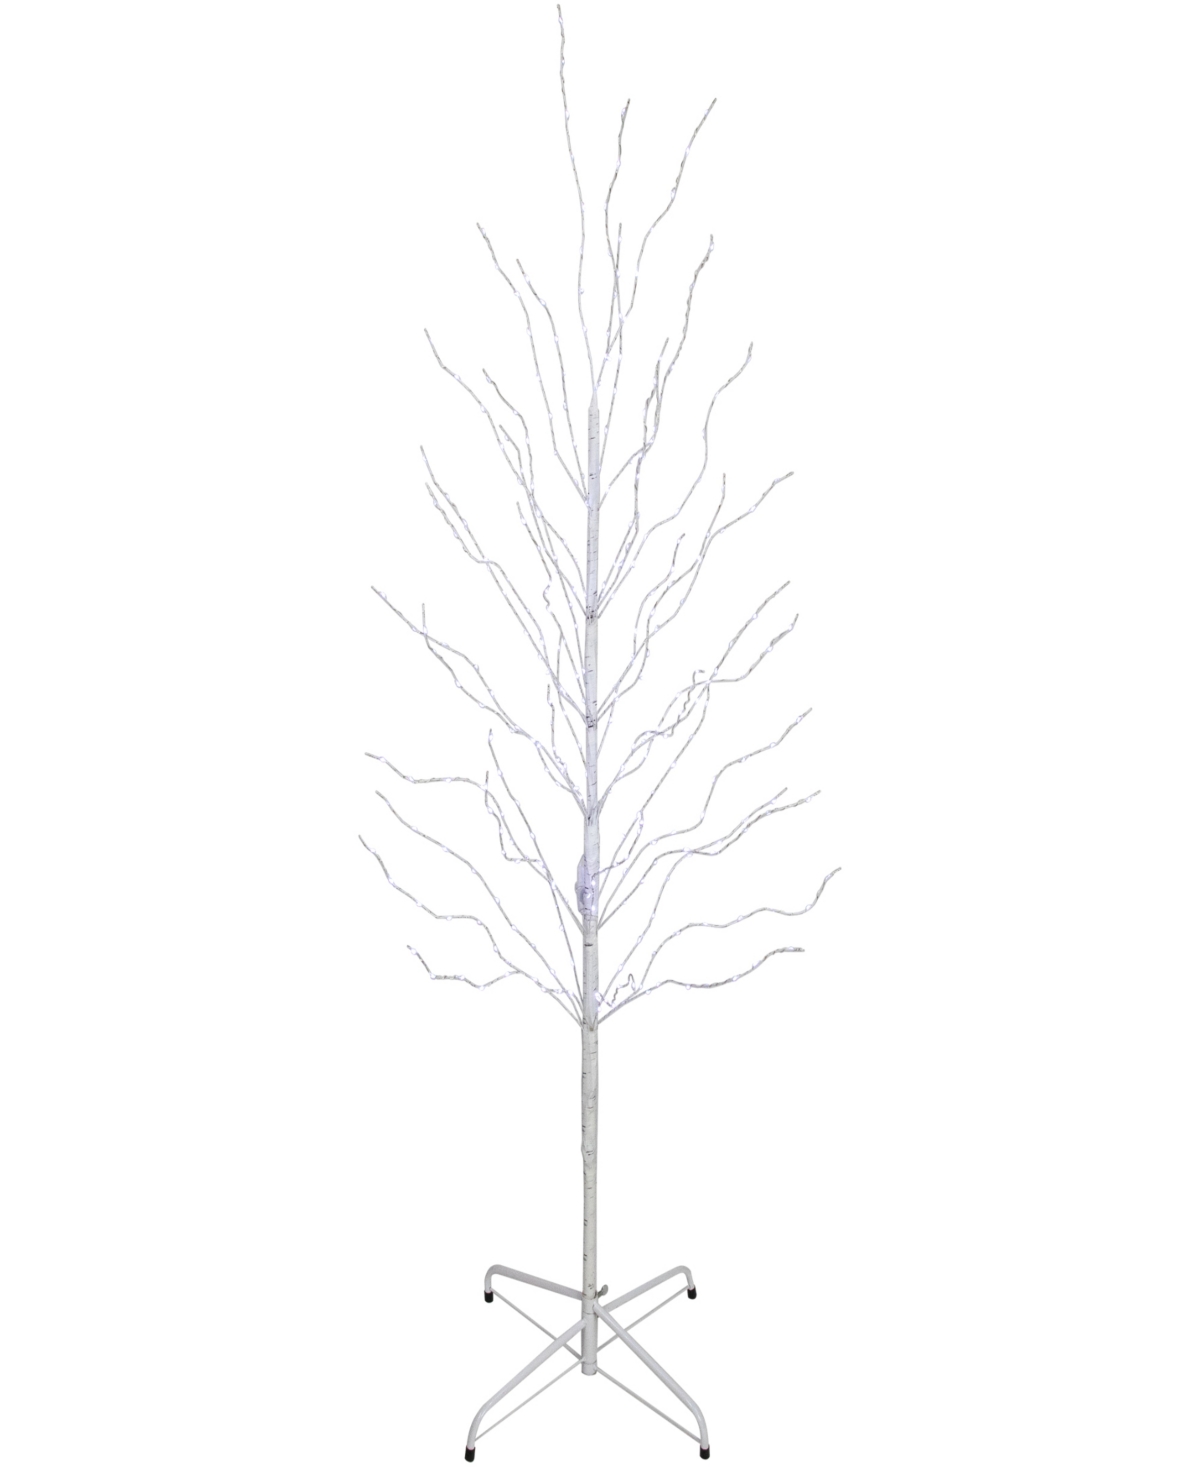 Northlight 5' Light Emitting Diode (led) Lighted Birch Christmas Twig Tree Cool Lights In White